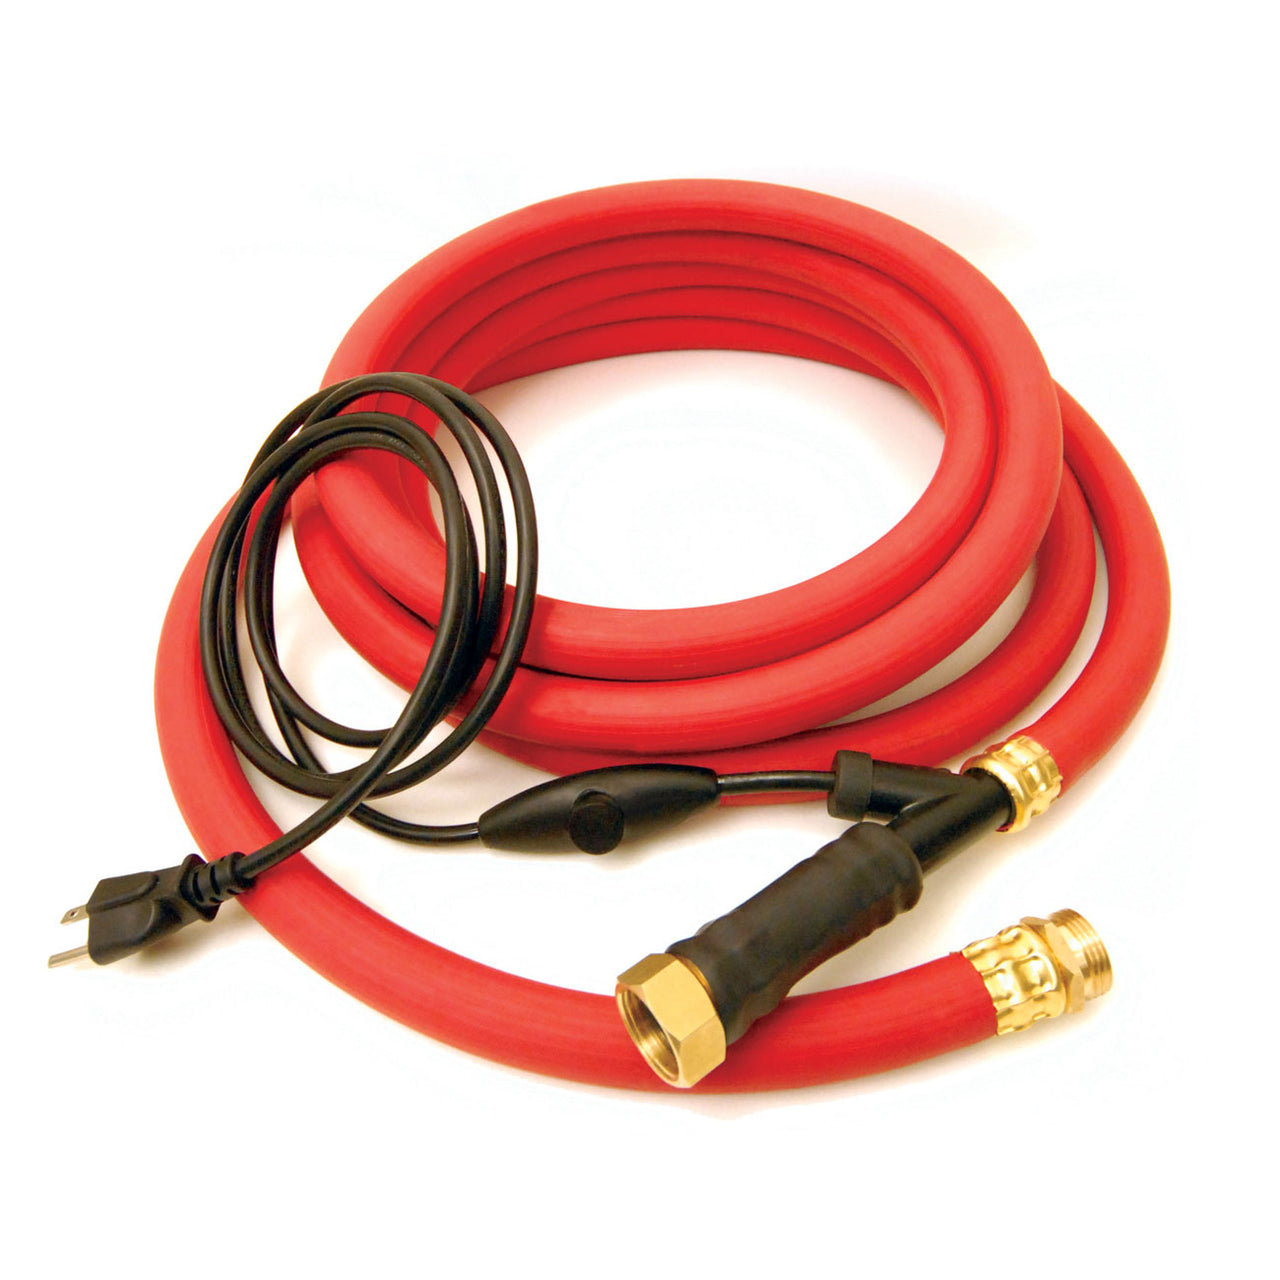 K&h Pet Products Rubber Thermo-Hose (40 Feet) - Rubber Thermo-Hose K&h Pet Products - Canada